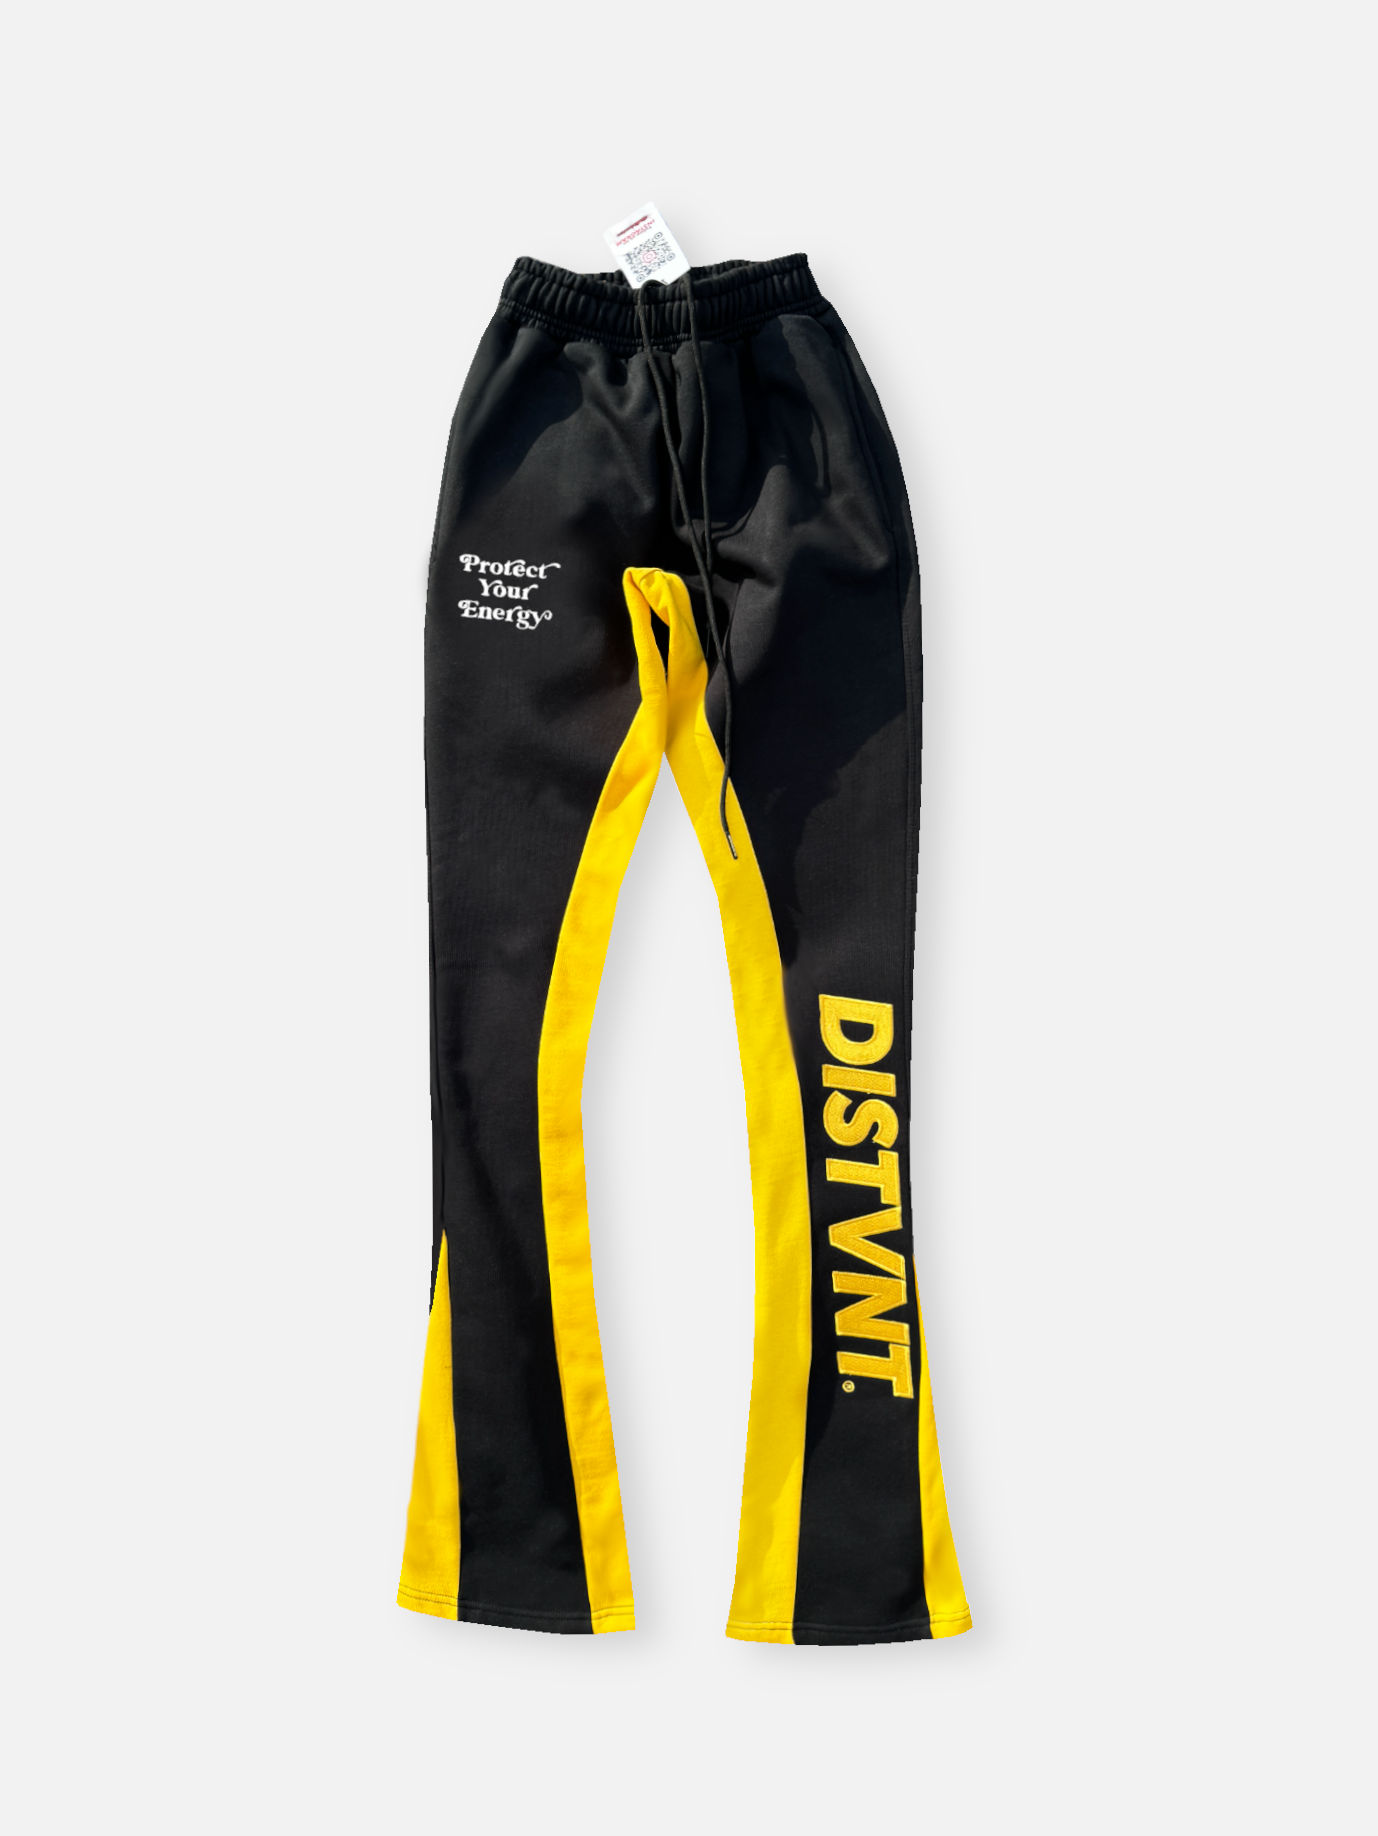 Two Tone Stacked Sweatpants (Slim Fit)